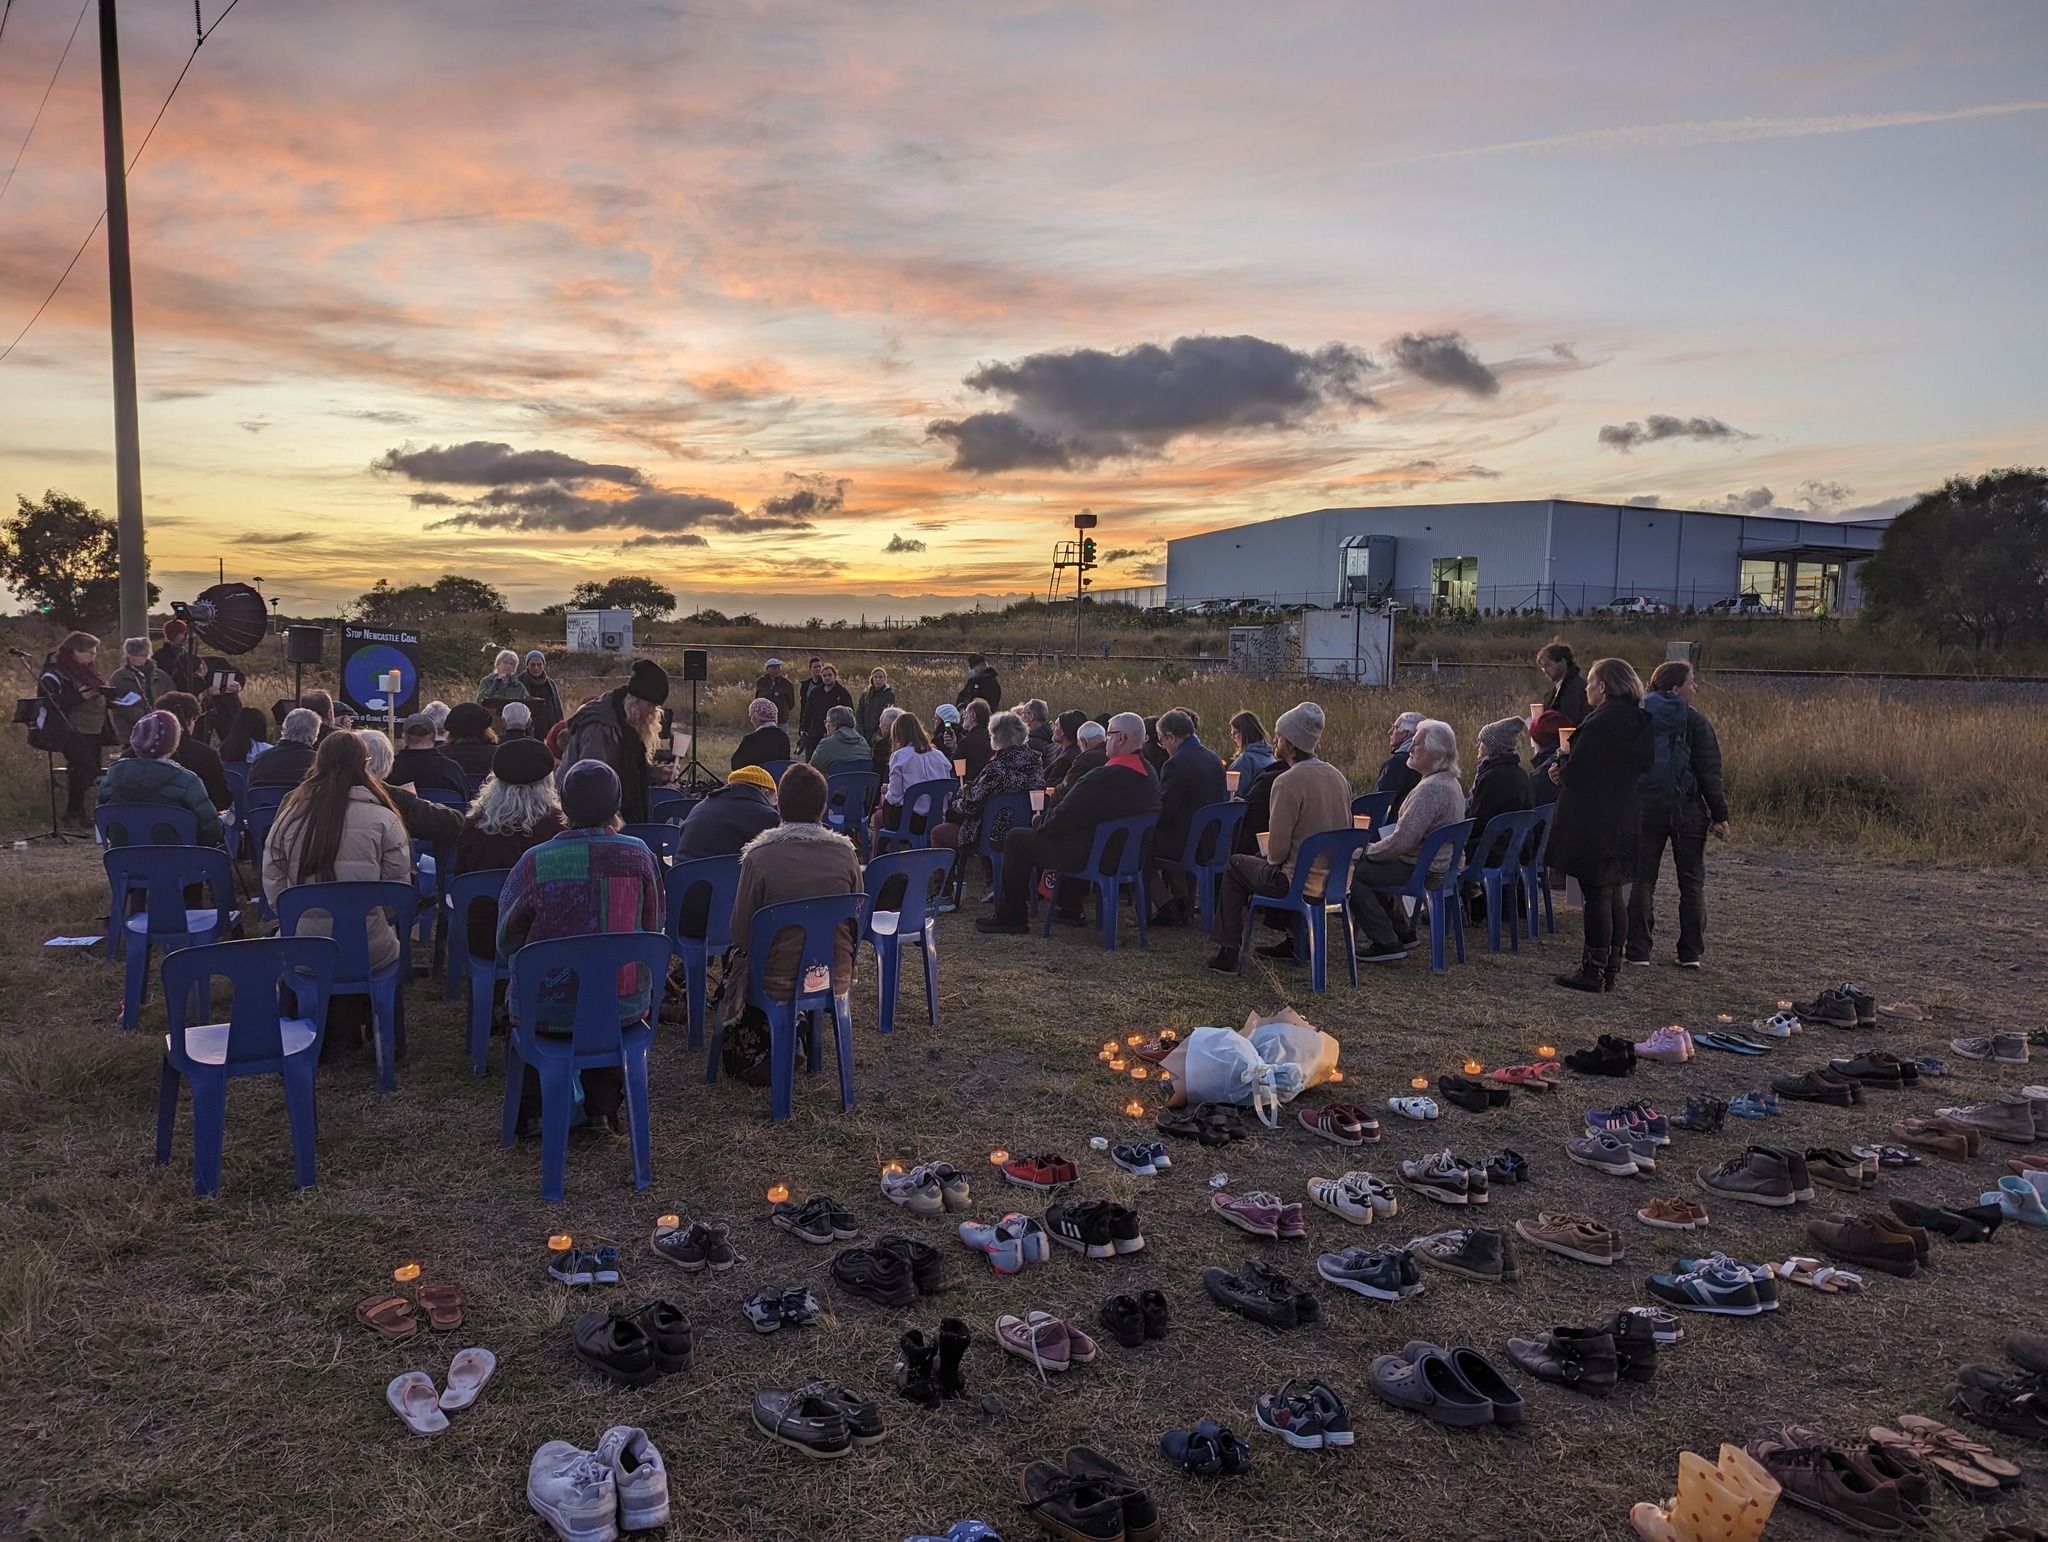 Rising Tide organised a vigil to commemorate those who will lose their lives to climate change impacts